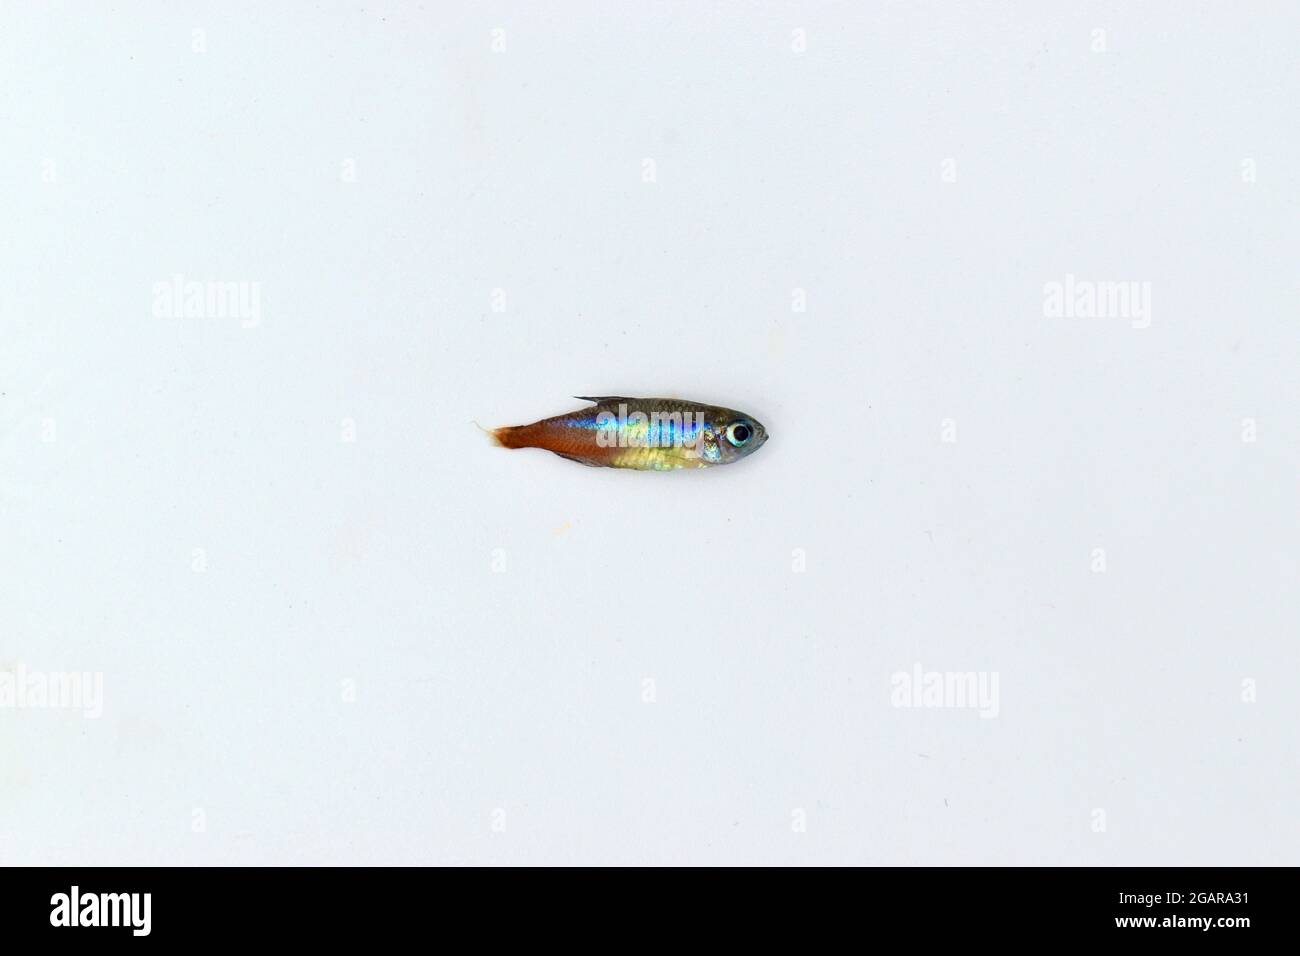 Neon tetra fish died due to poor water quality i.e. ammonia poisoning. Dead Small fish. Animal abuse. Isolated on white. Stock Photo